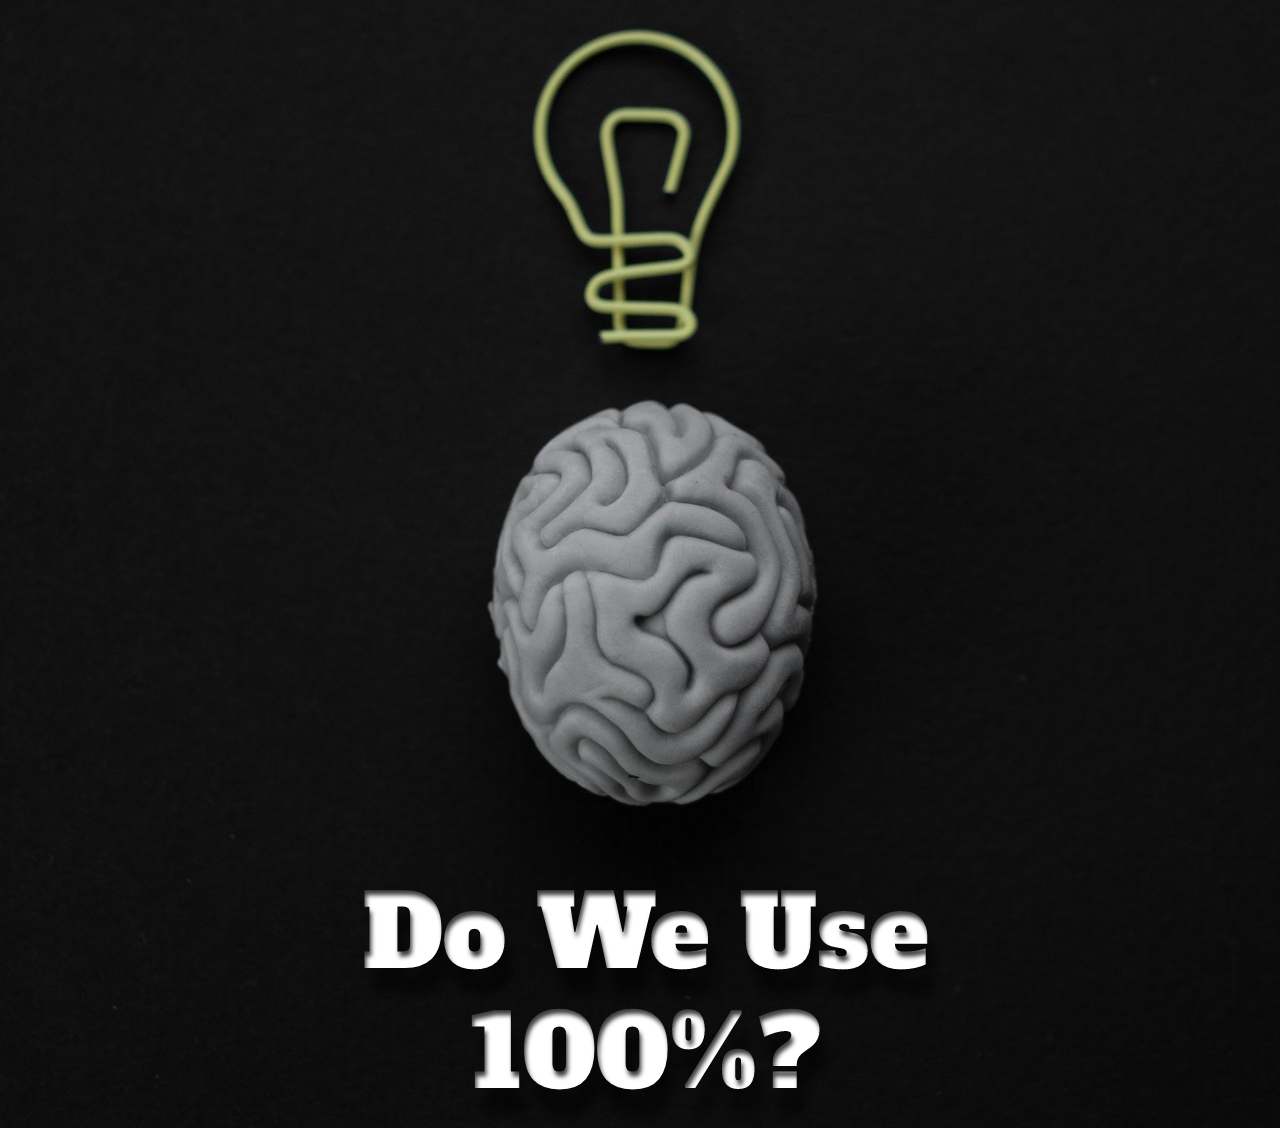 Do We Use 100% of Our Brain?